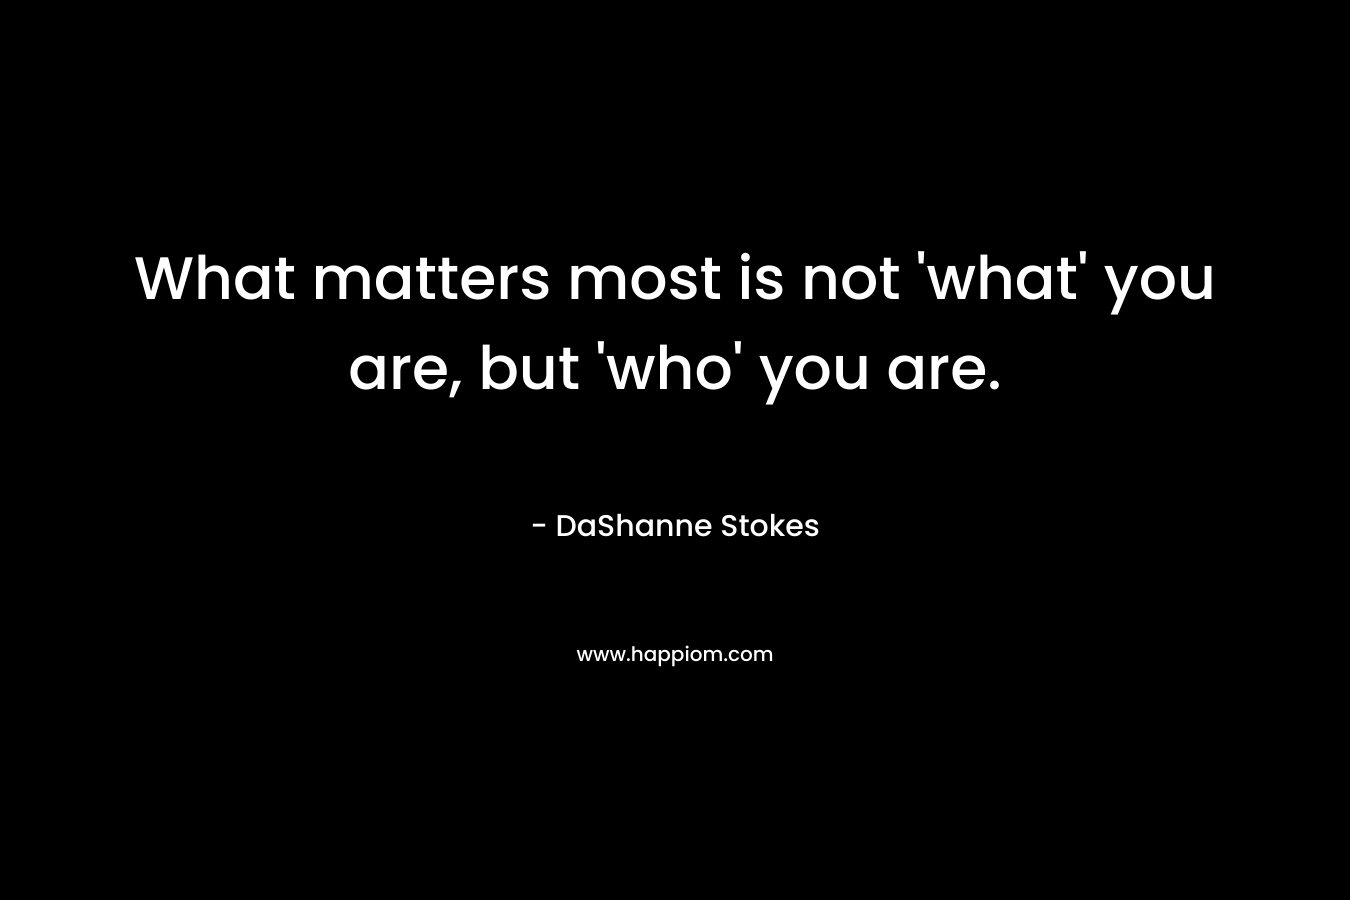 What matters most is not 'what' you are, but 'who' you are.